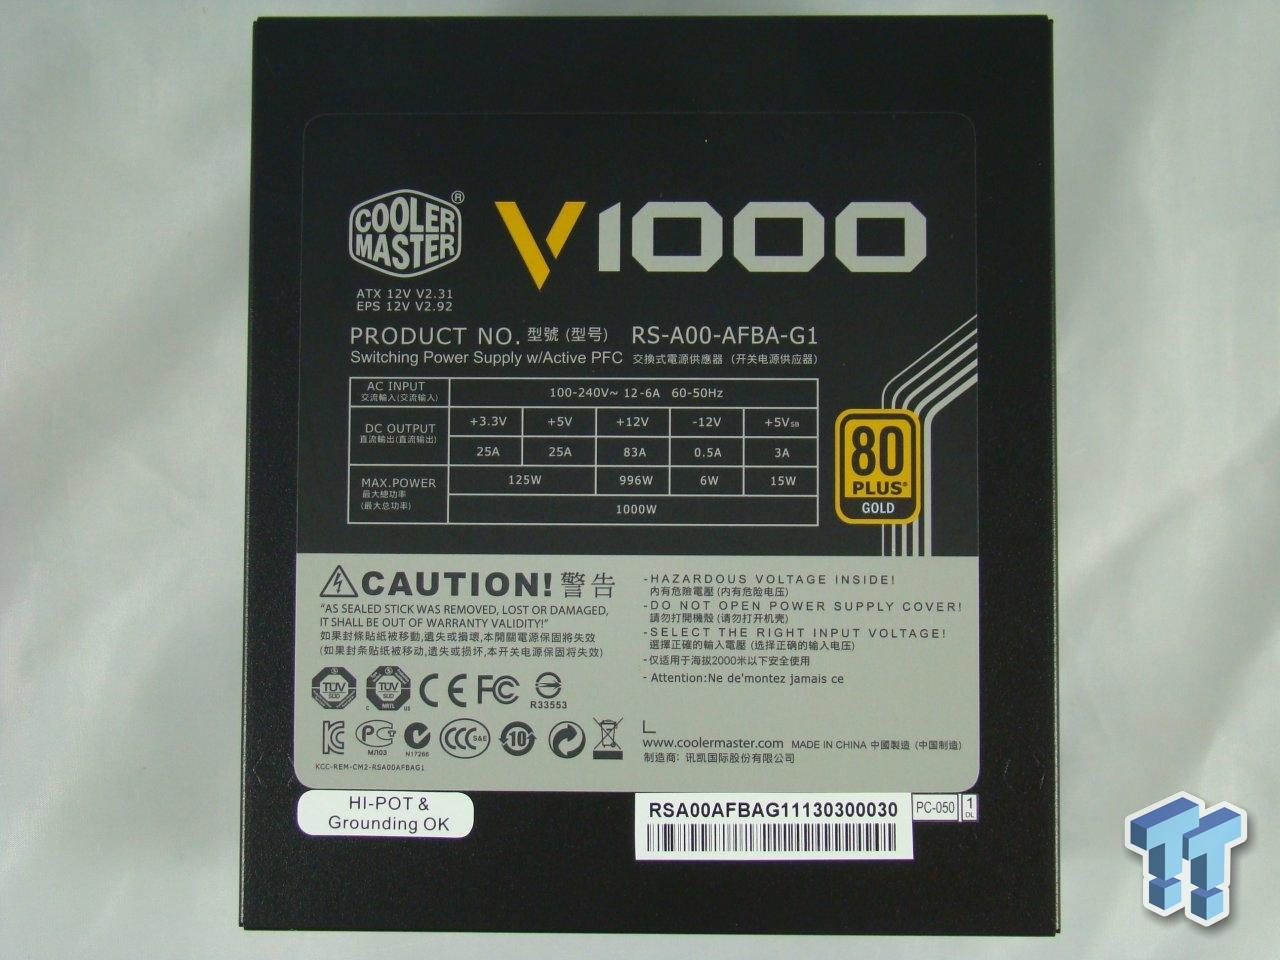 V1000 1000W Fully Modular 80 PLUS Gold Certified Power Supply